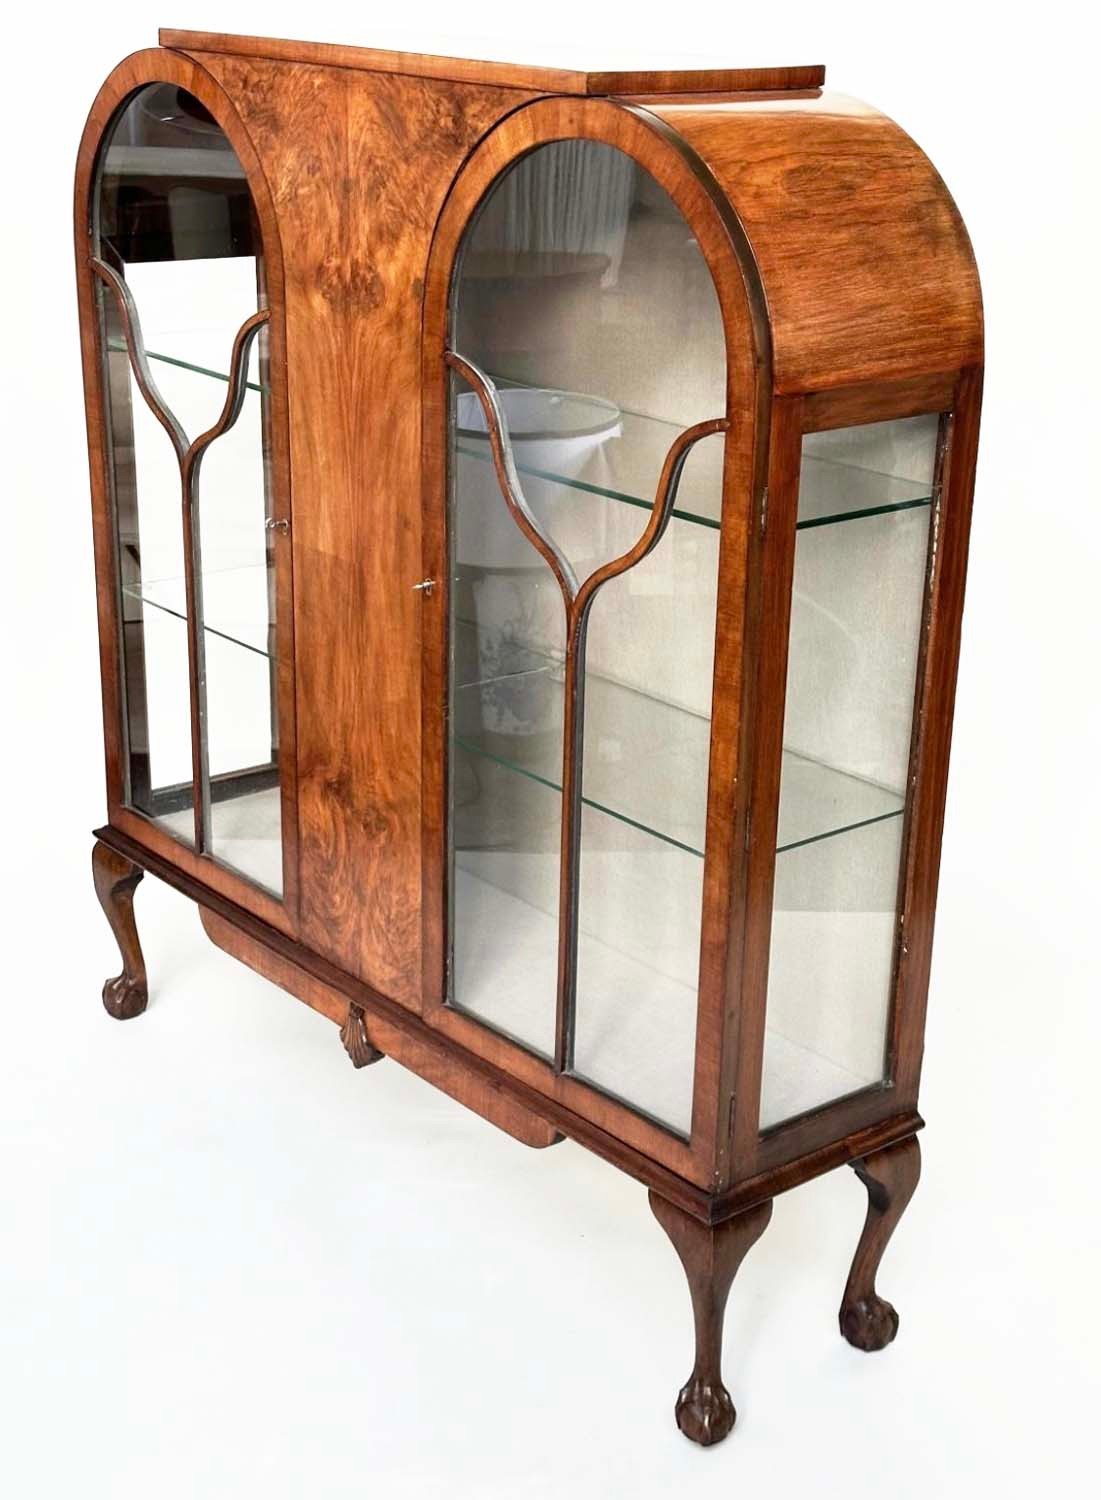 ART DECO DISPLAY CASE, burr walnut with two arched glazed doors enclosing shelves, 117cm W x 128cm H - Image 6 of 6